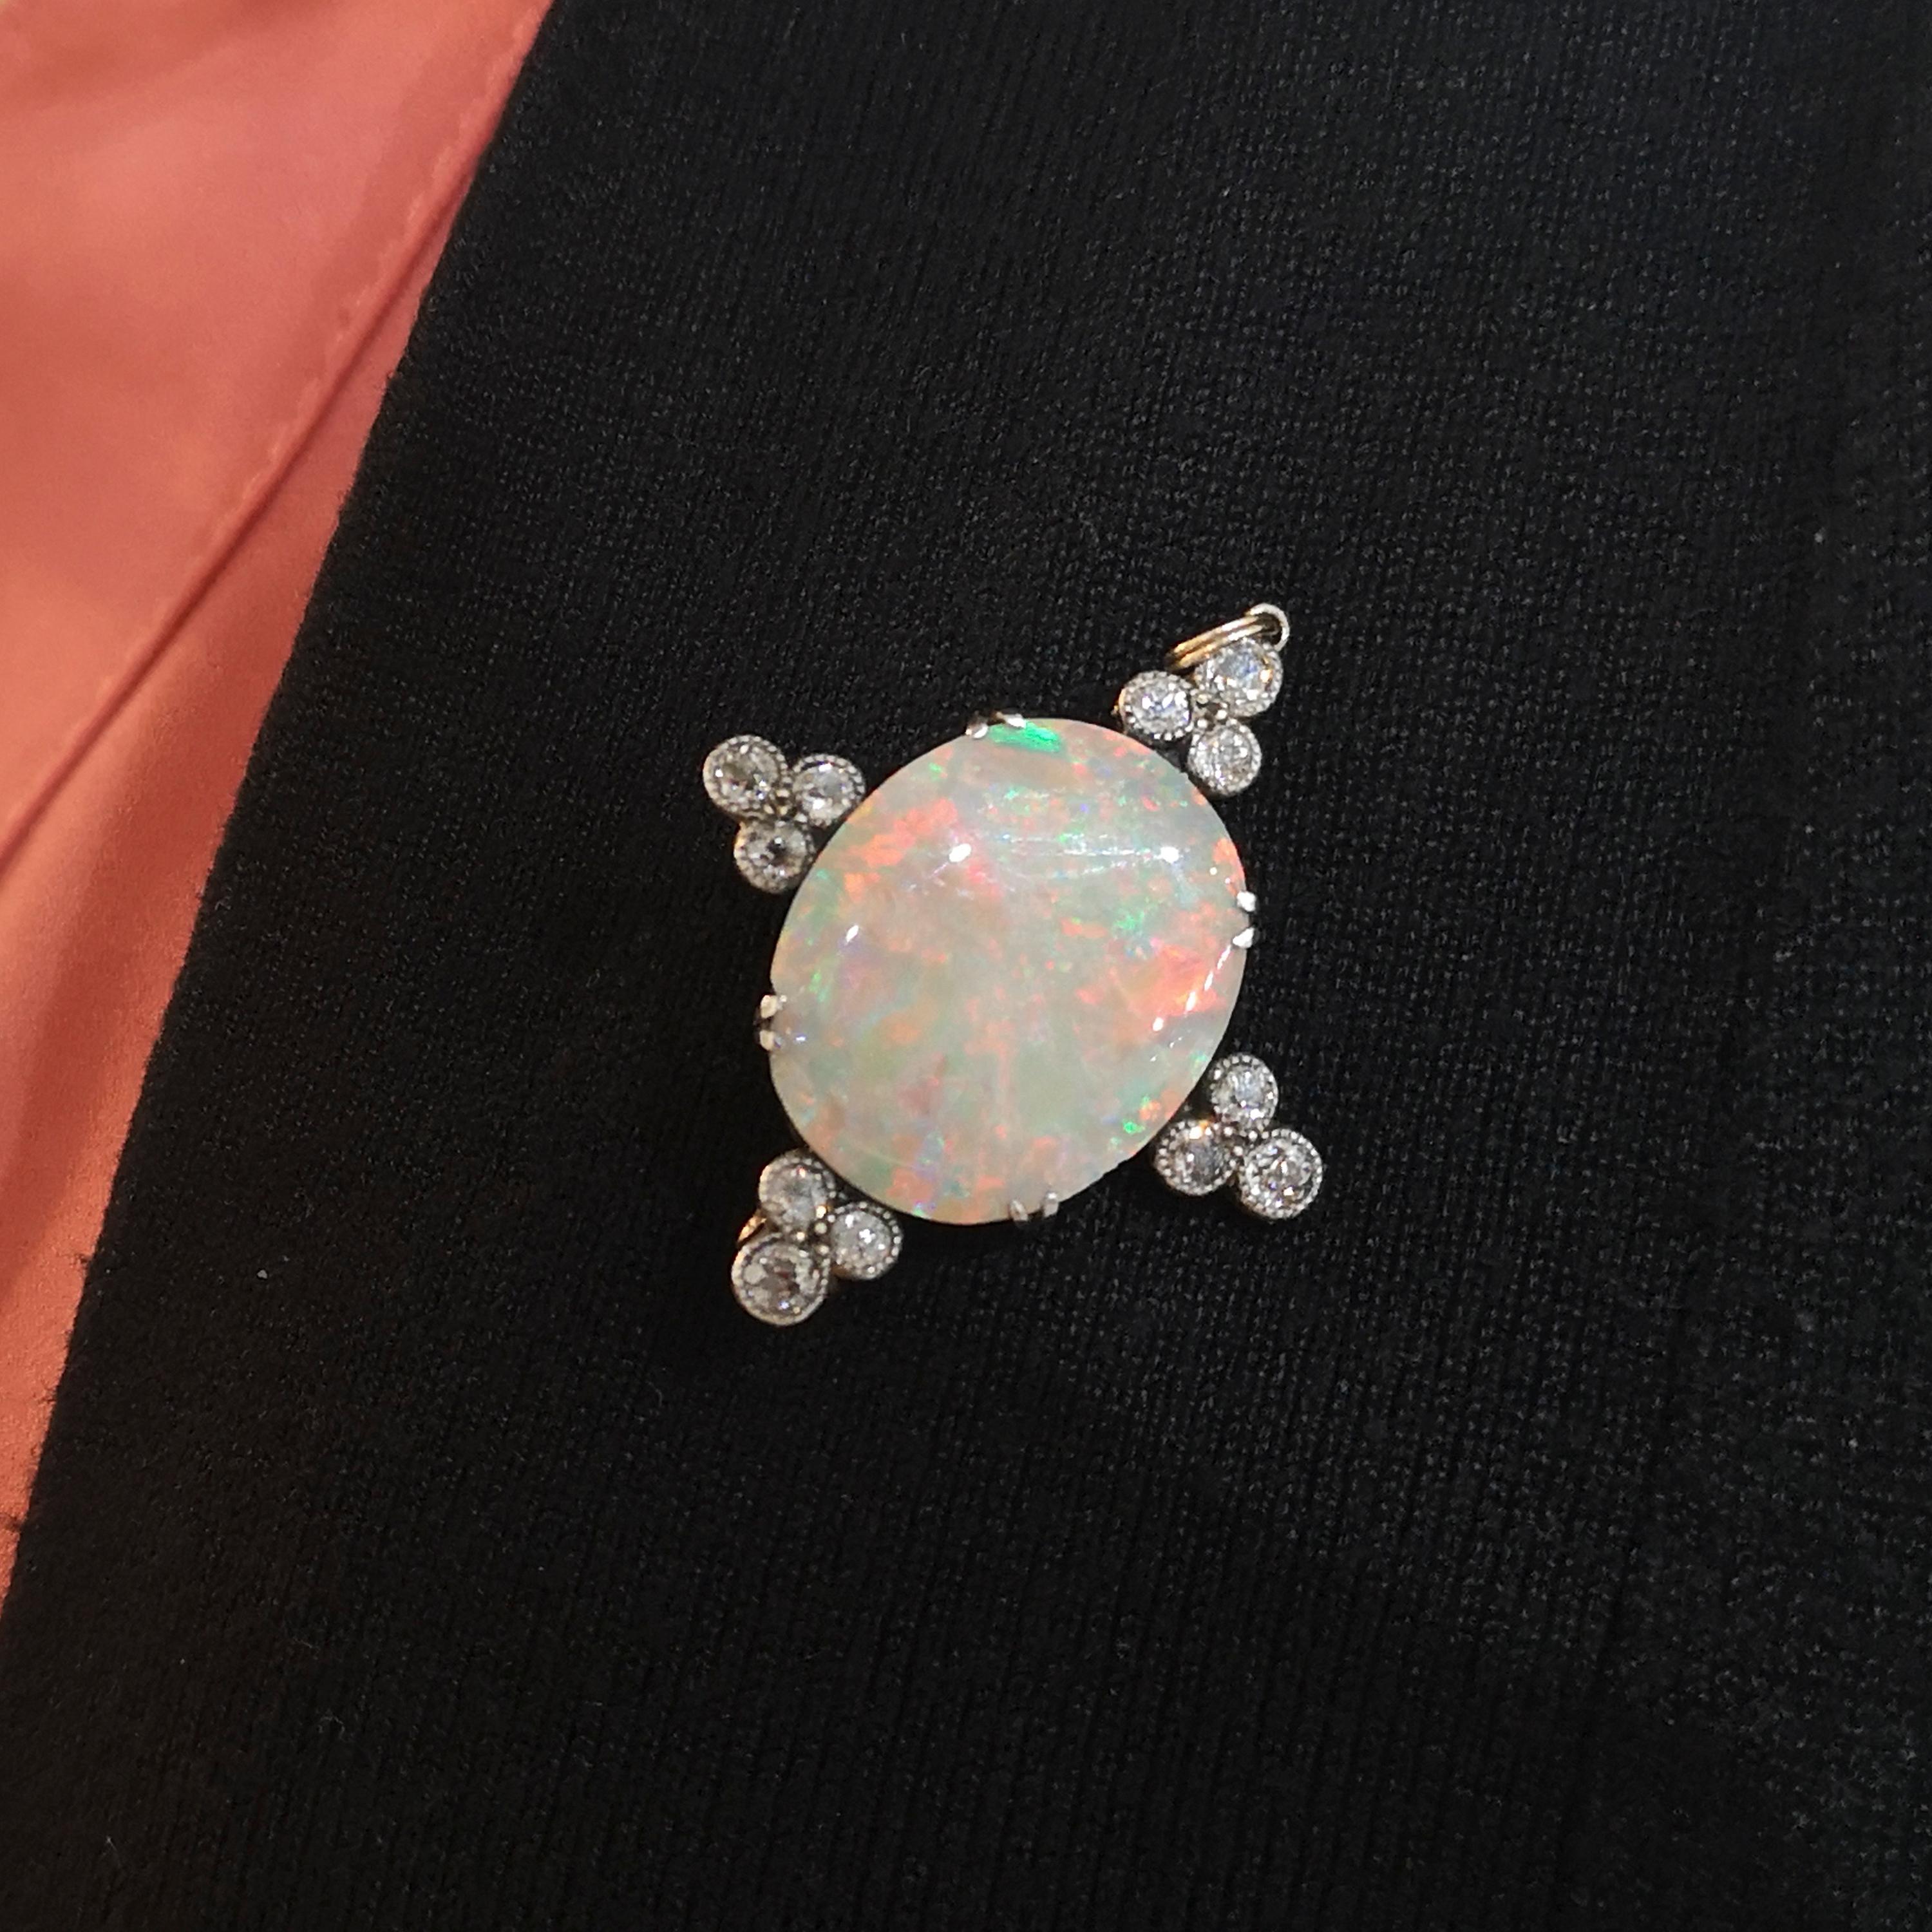 Late Victorian Antique Opal and Diamond Brooch, Silver Upon Gold, Circa 1900 For Sale